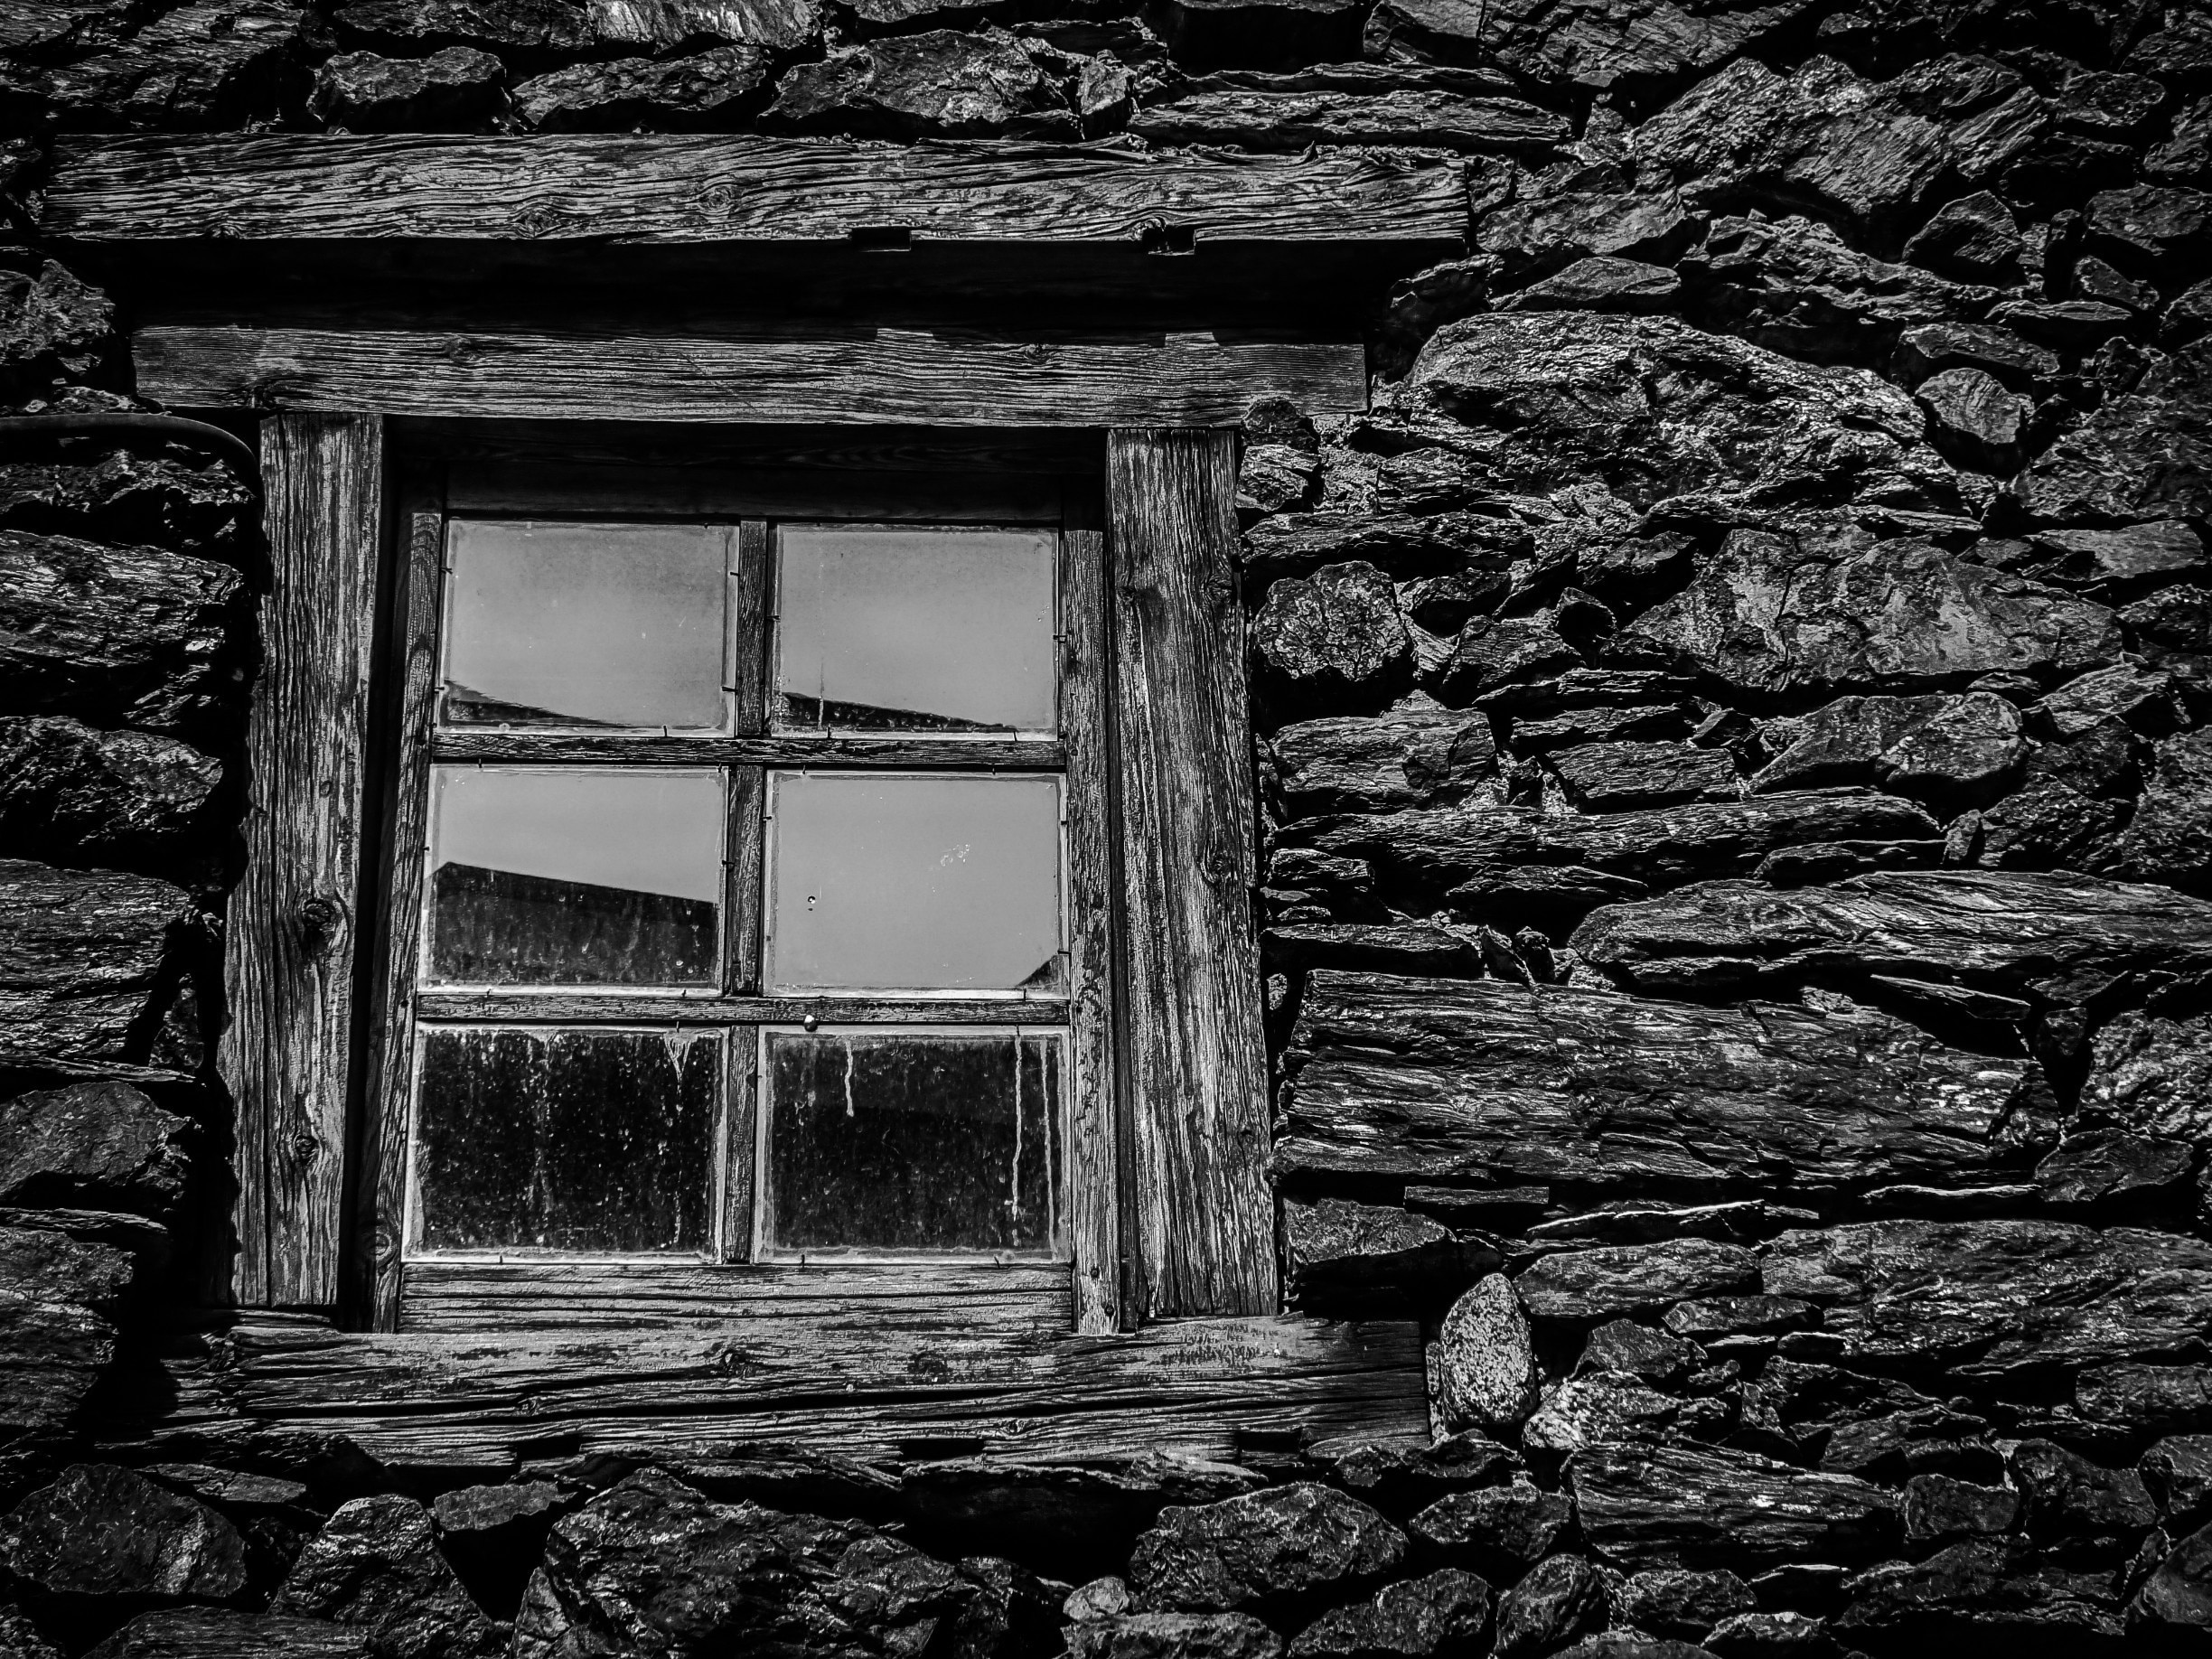 Window from the Sant Bartomeu Church in Soldeu, Andorra. 

This small Romanesque chapel, located on the village of Soldeu in Andorra, is dedicated to St. Bartolomé and dates from the seventeenth century. http://bit.ly/1Y4gTVu